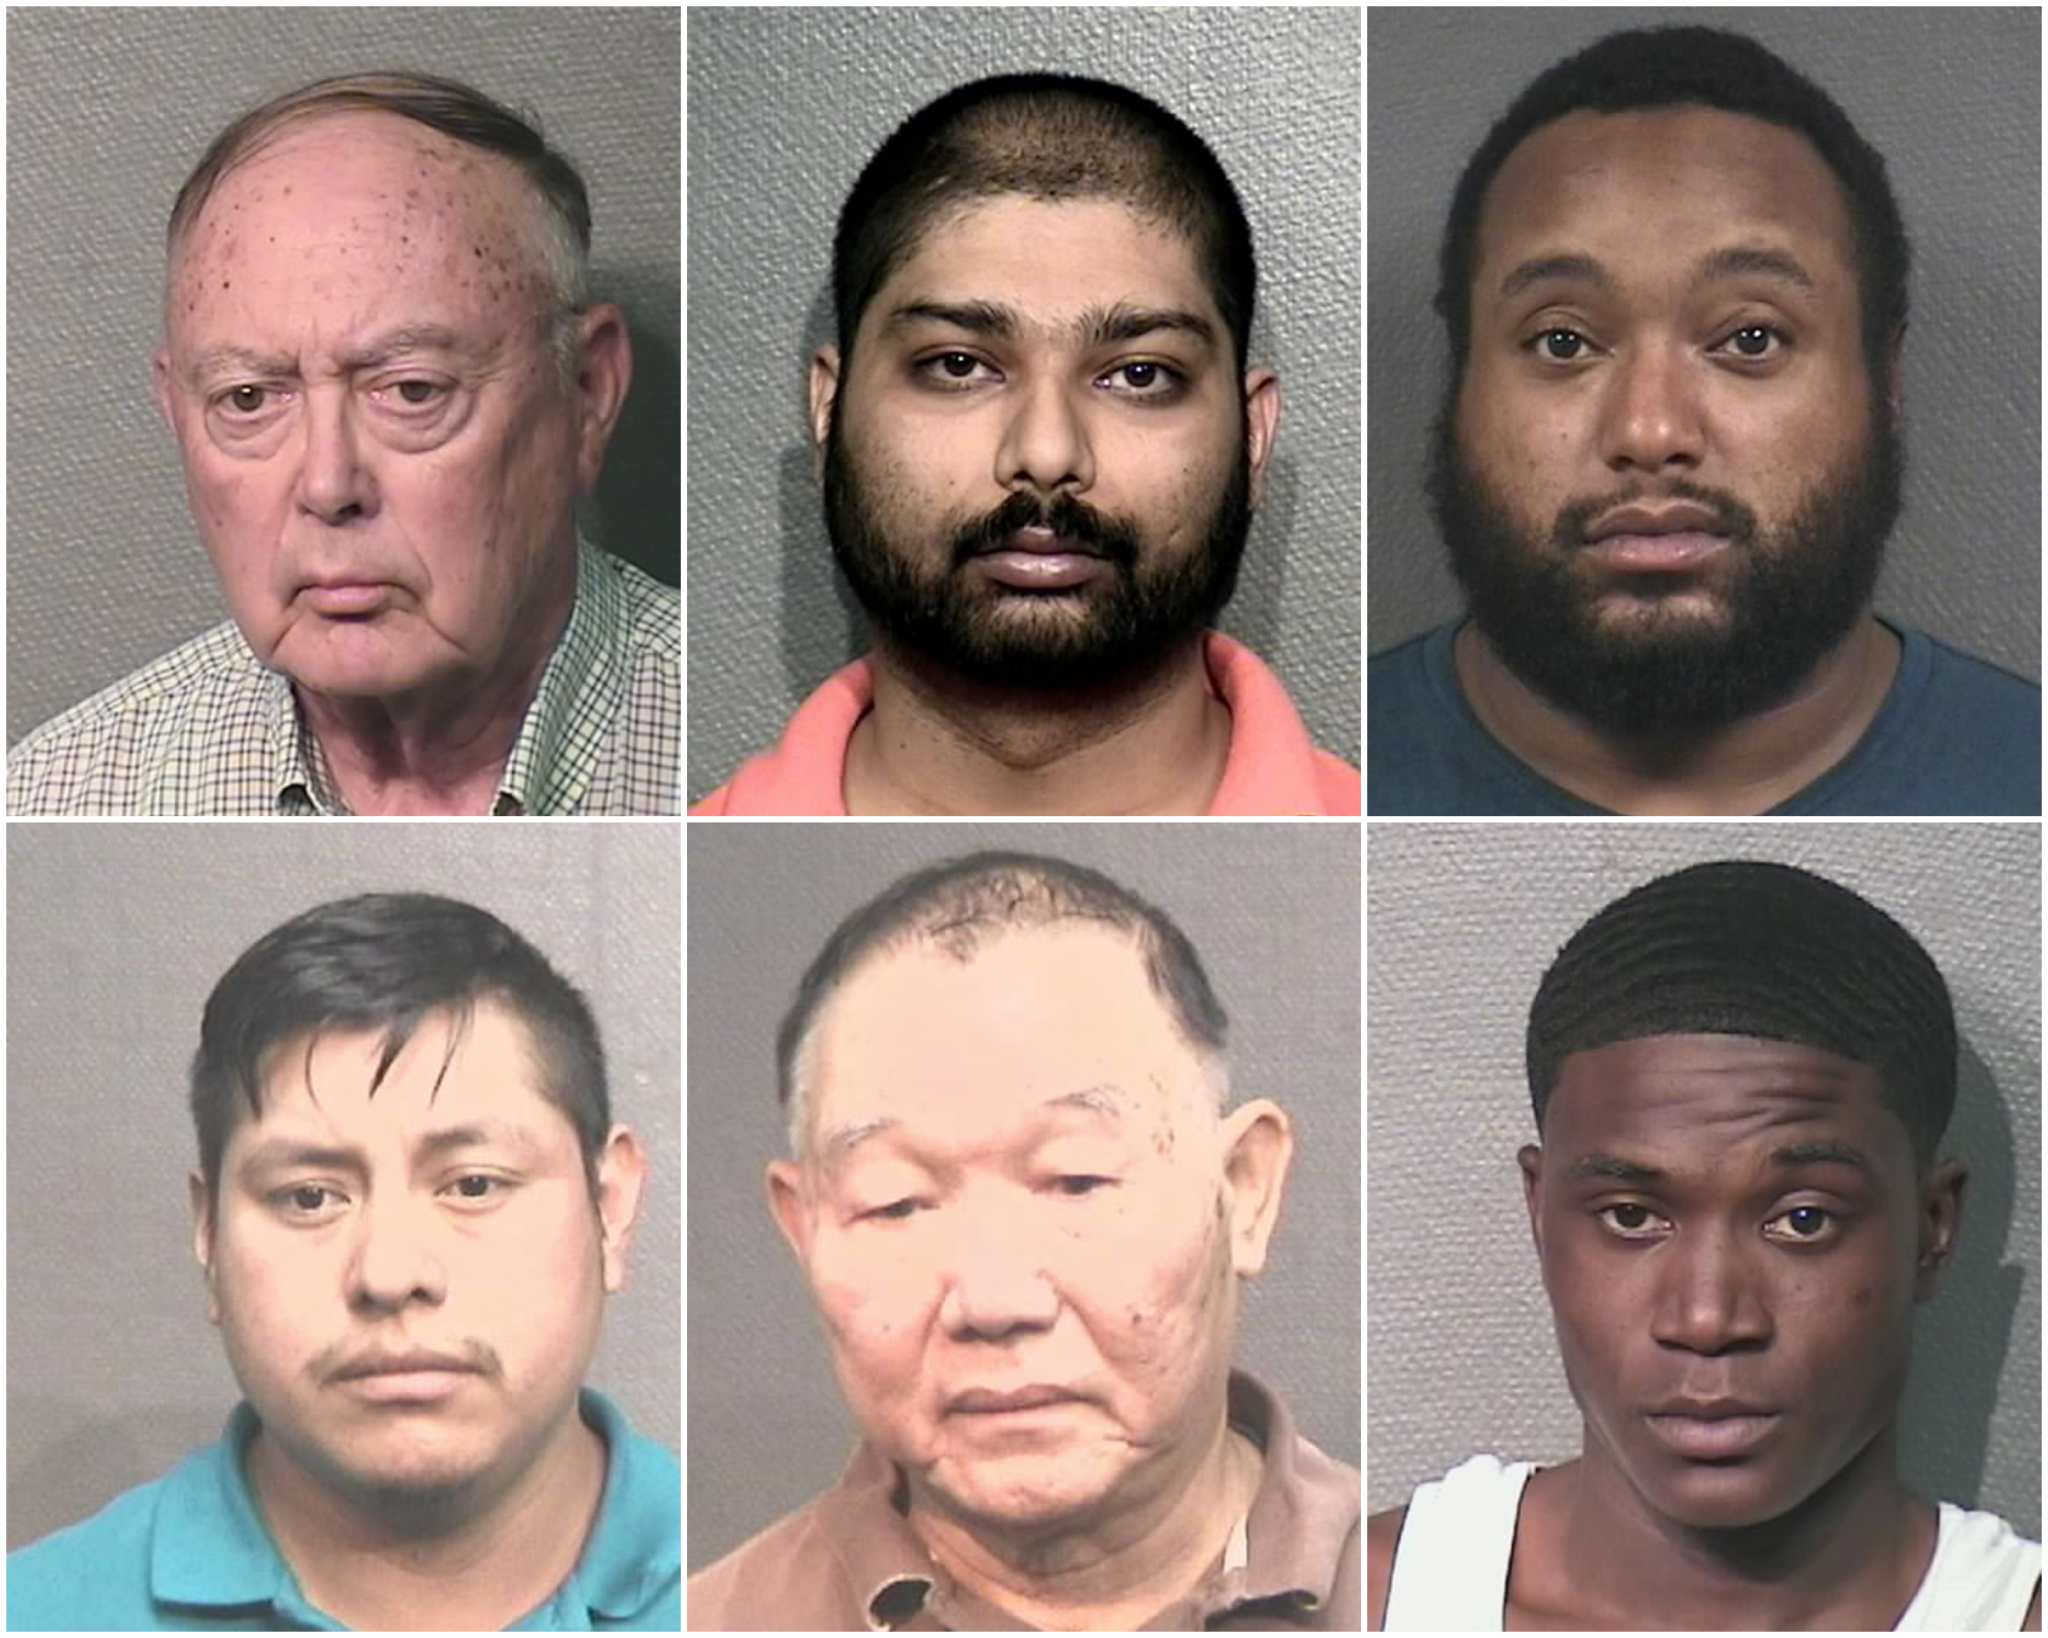 69 Suspects Arrested On Sex Trade Charges By The Houston Police Department Vice Division